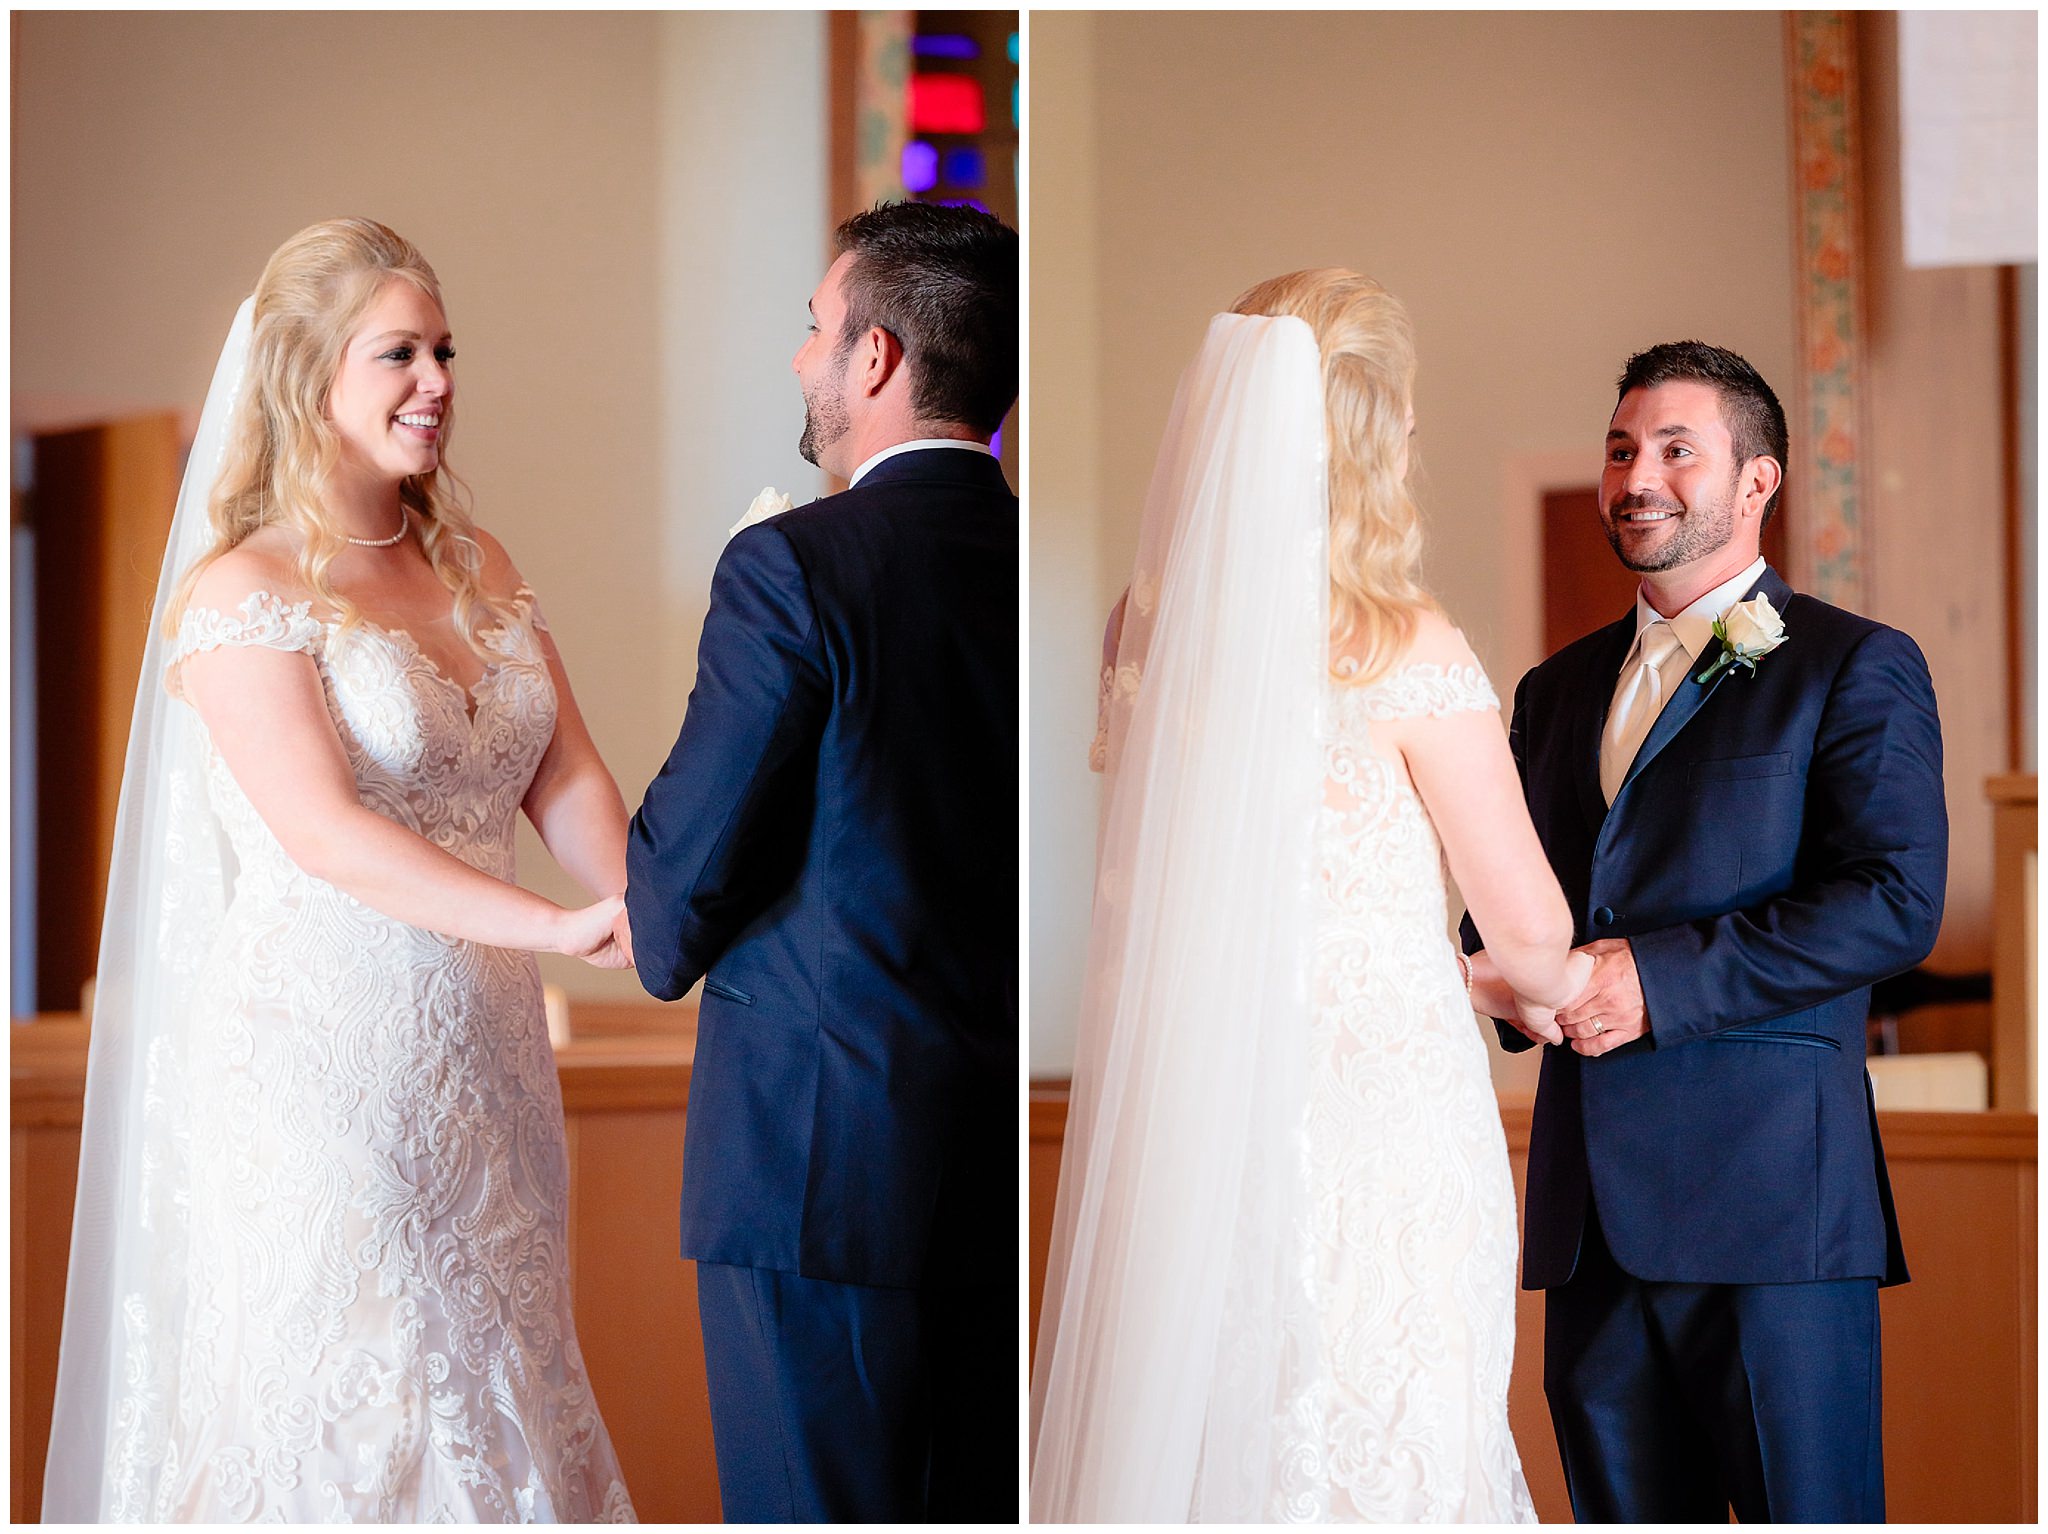 Bride and groom look at each other during vows at Zion Lutheran Church